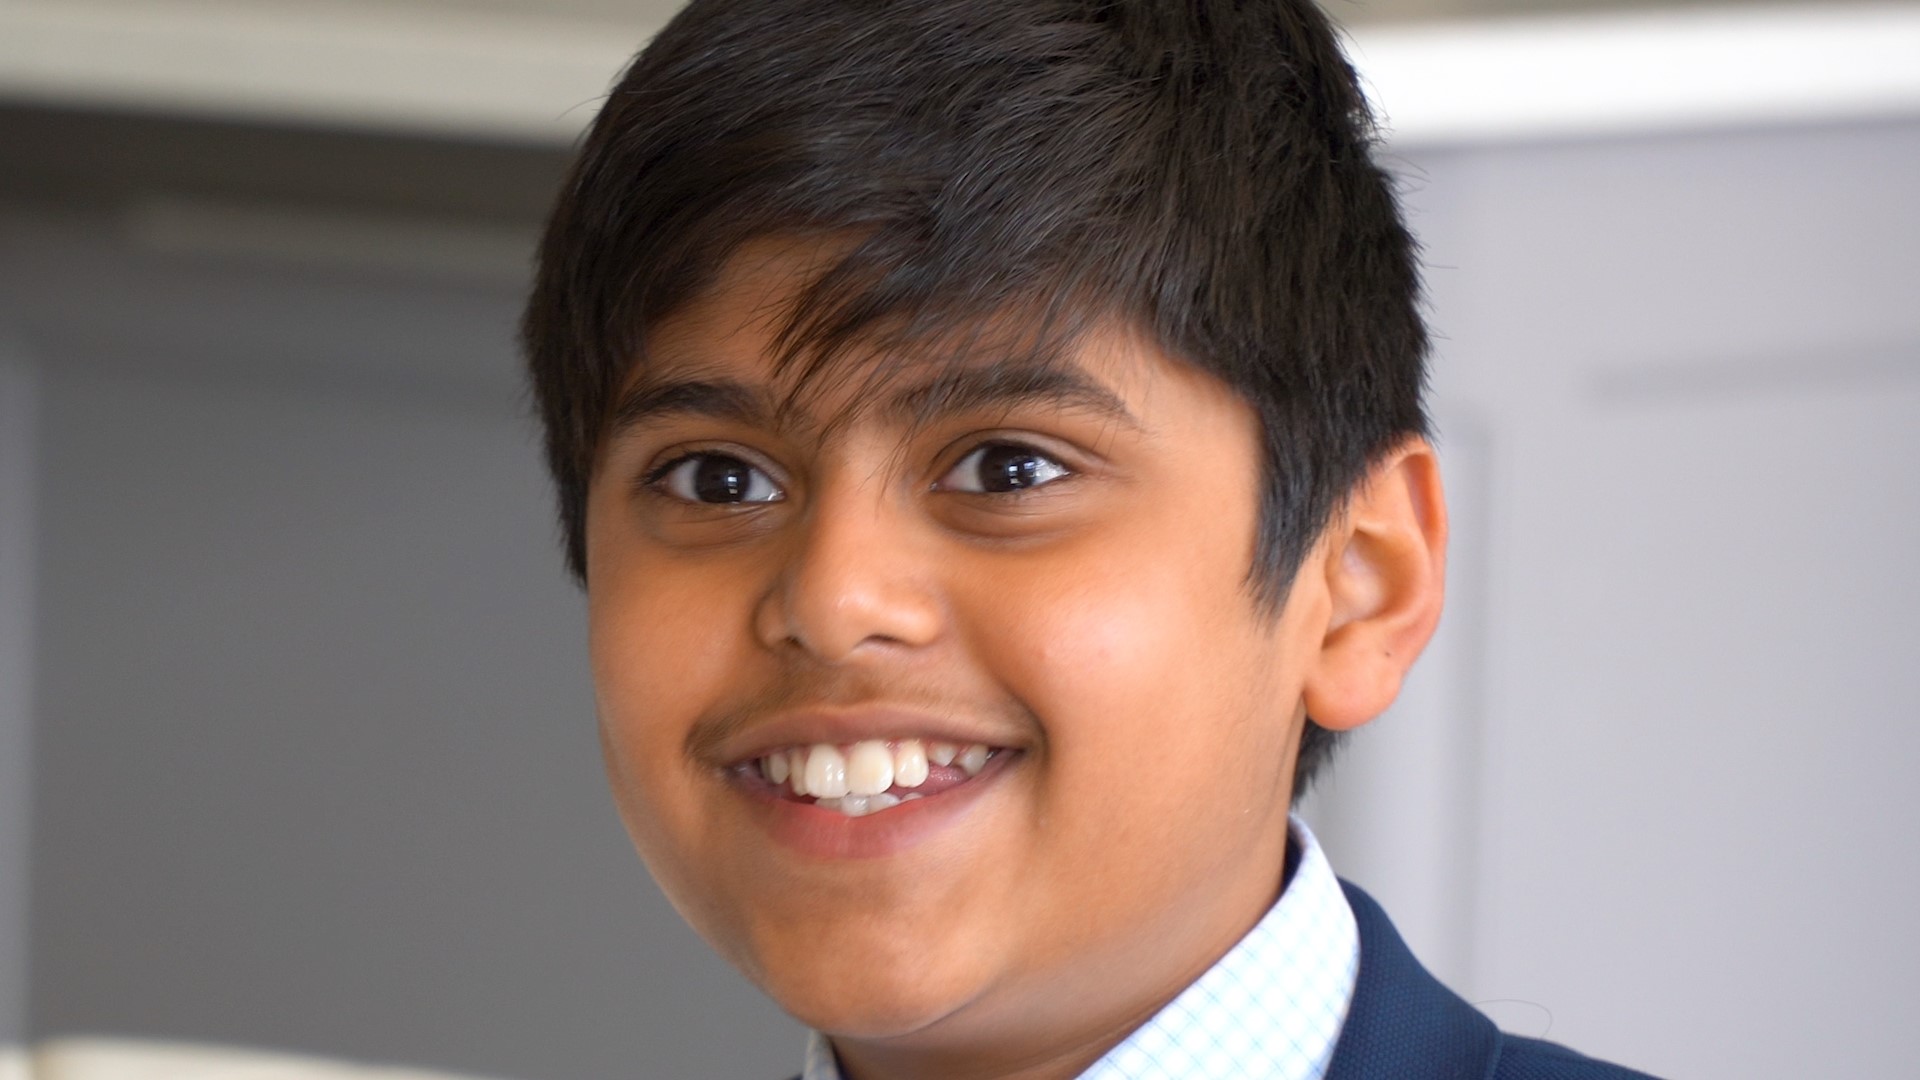 Siddarth Nandyala is a Texas eighth grader who already accomplished so much, including creating prosthetic arms. Here is his full interview.